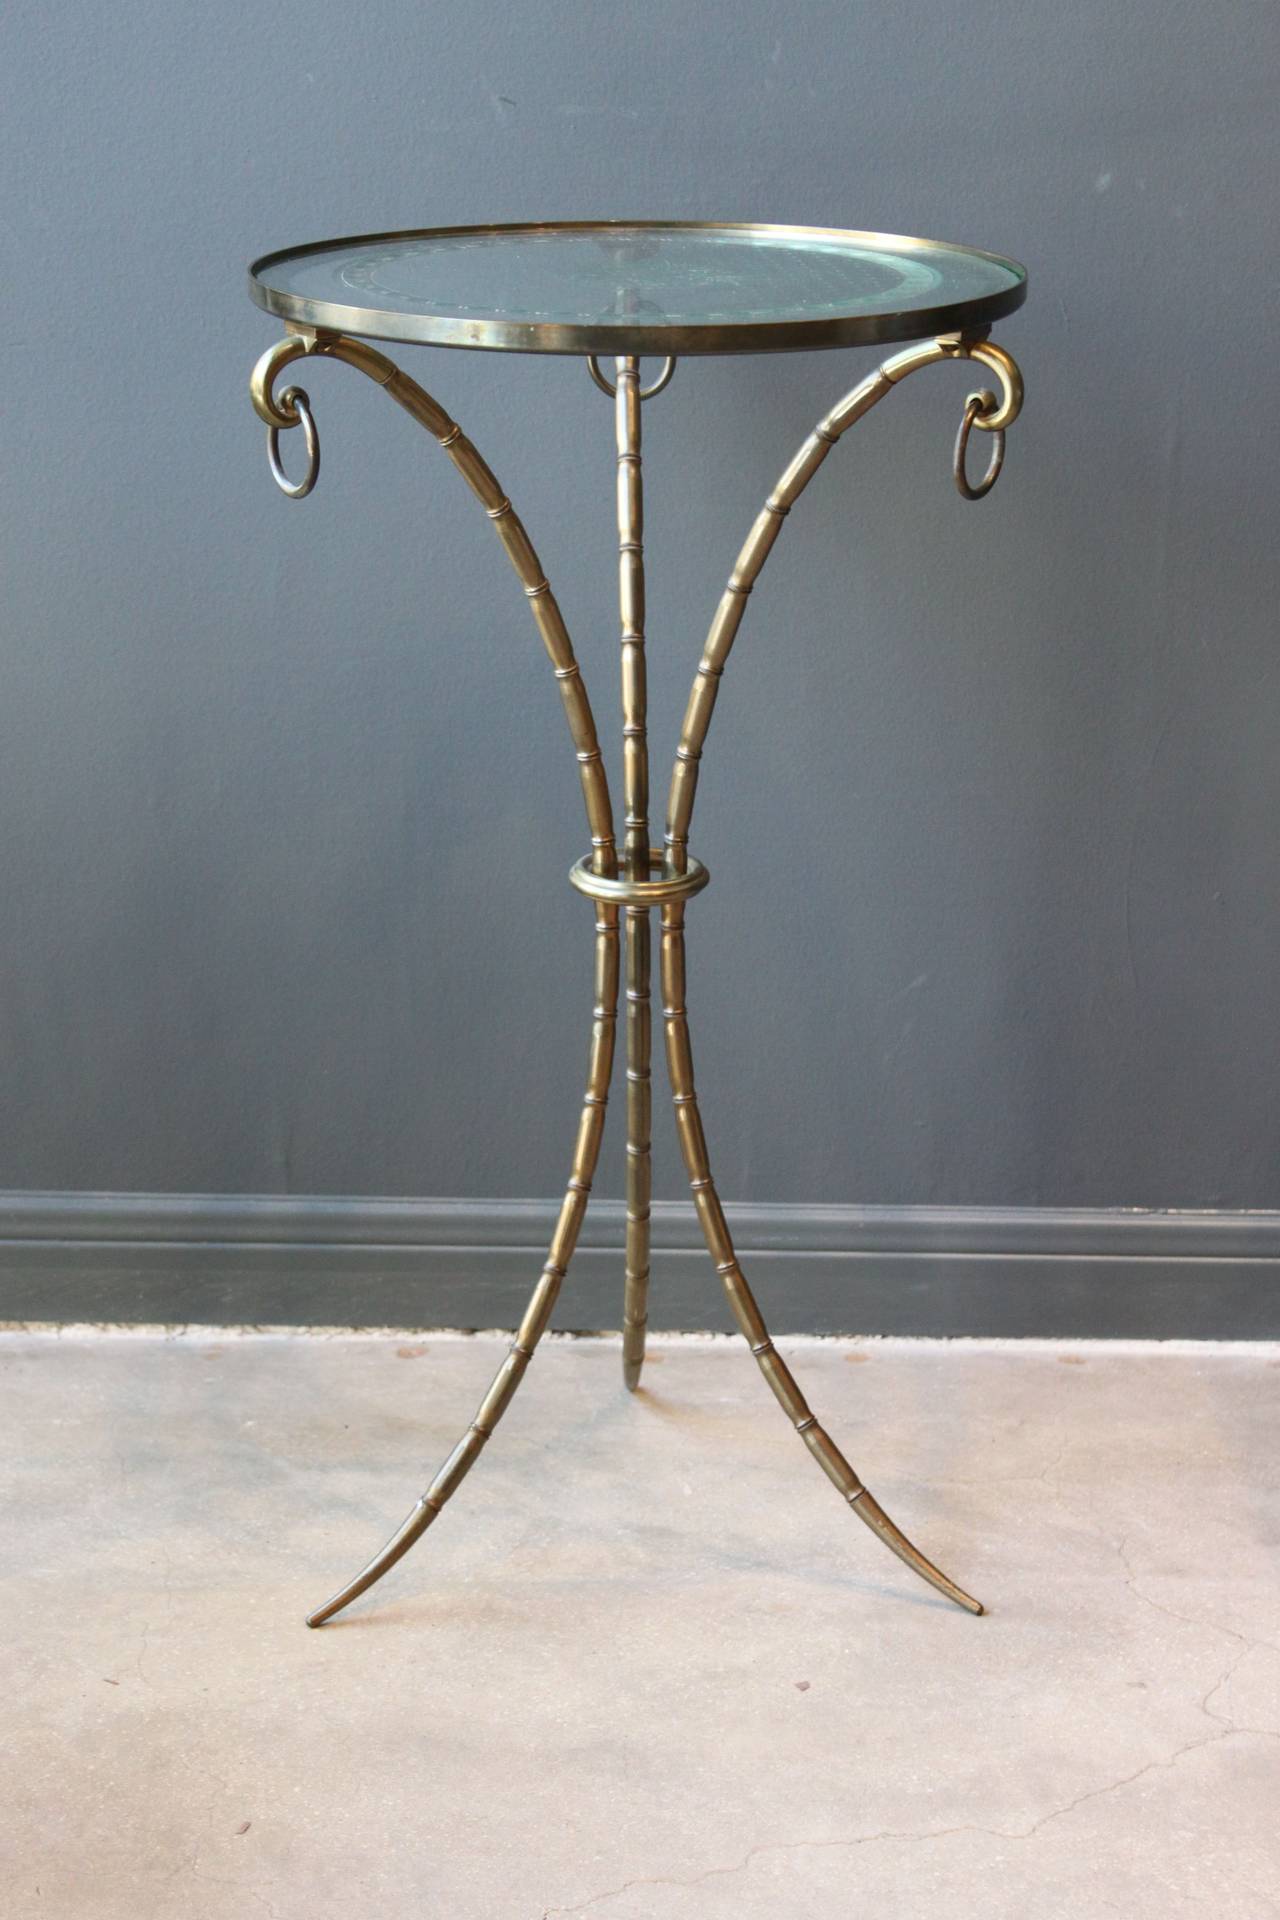 A wonderful French faux bamboo brass gueridon with an etched glass top, circa 1940s. The etched glass top has a lovely floral design.